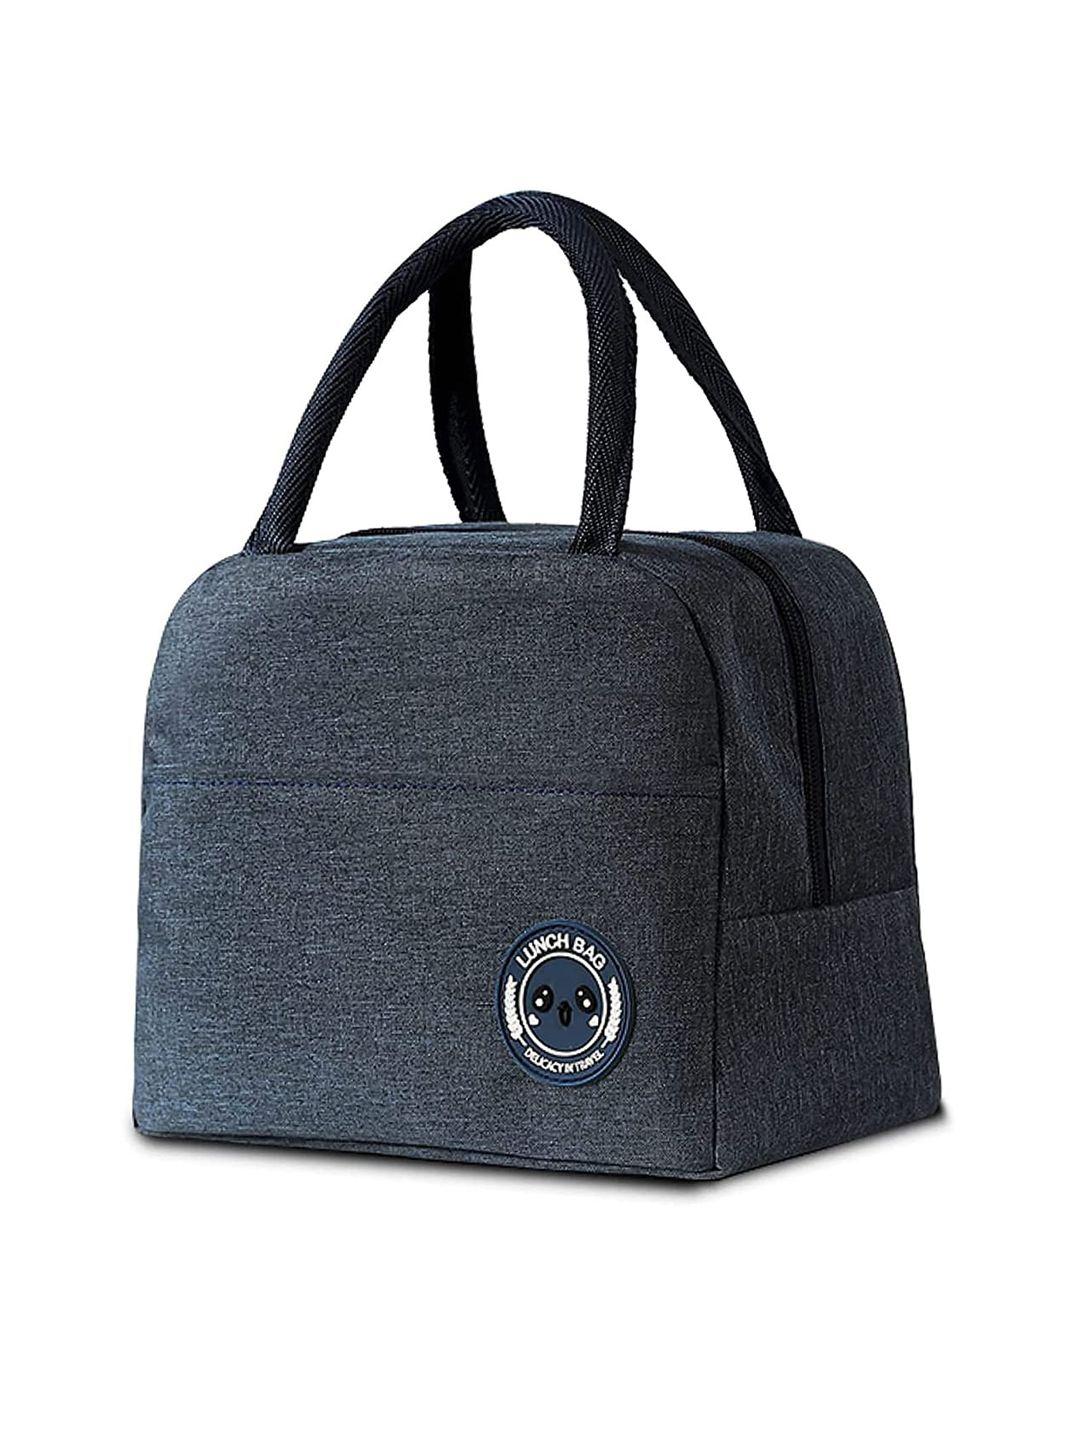 house of quirk navy blue insulated lunch bag